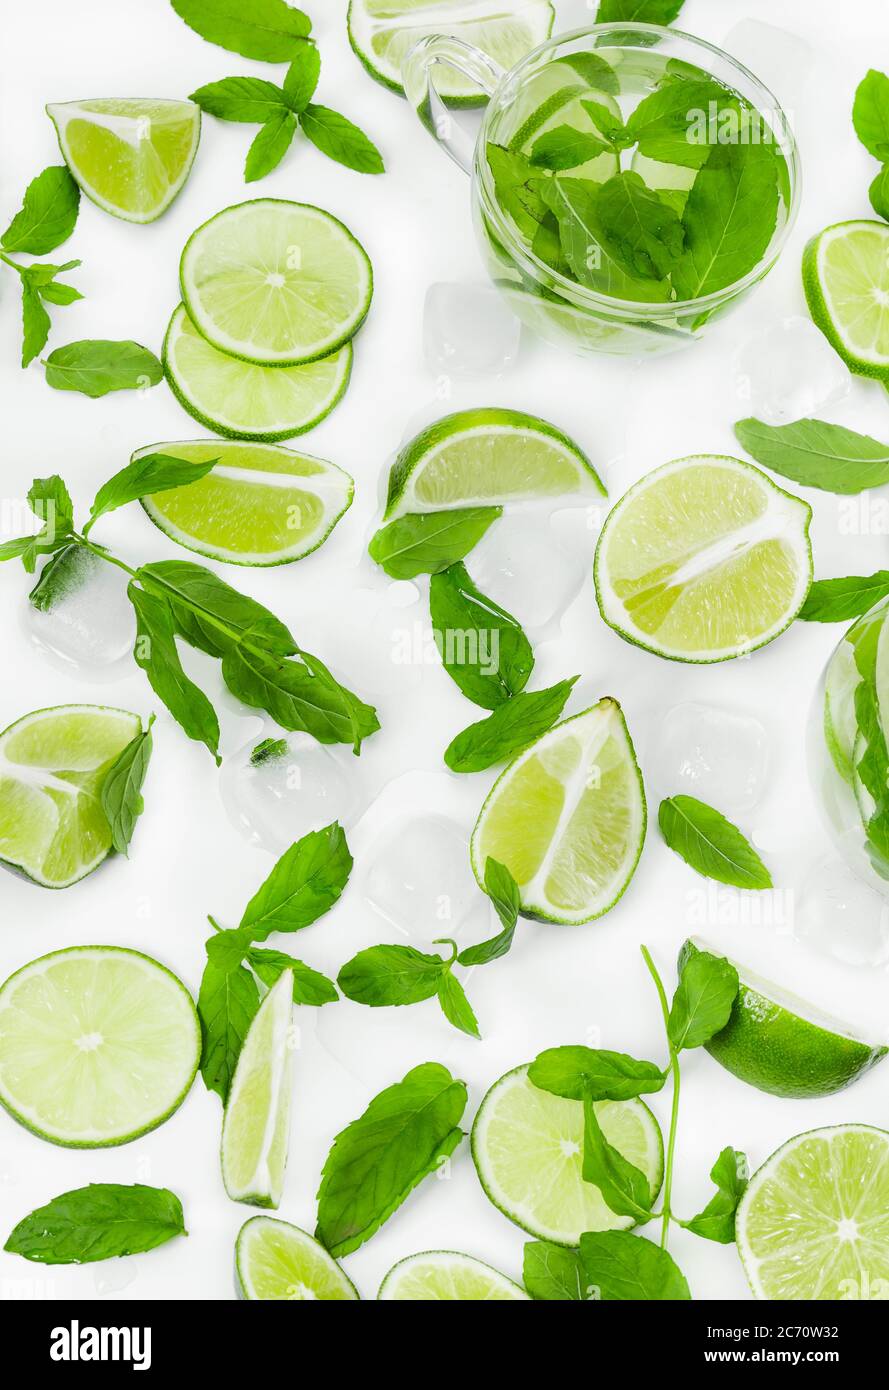 Limes, fresh mint and ice for mojito on white background. Stock Photo